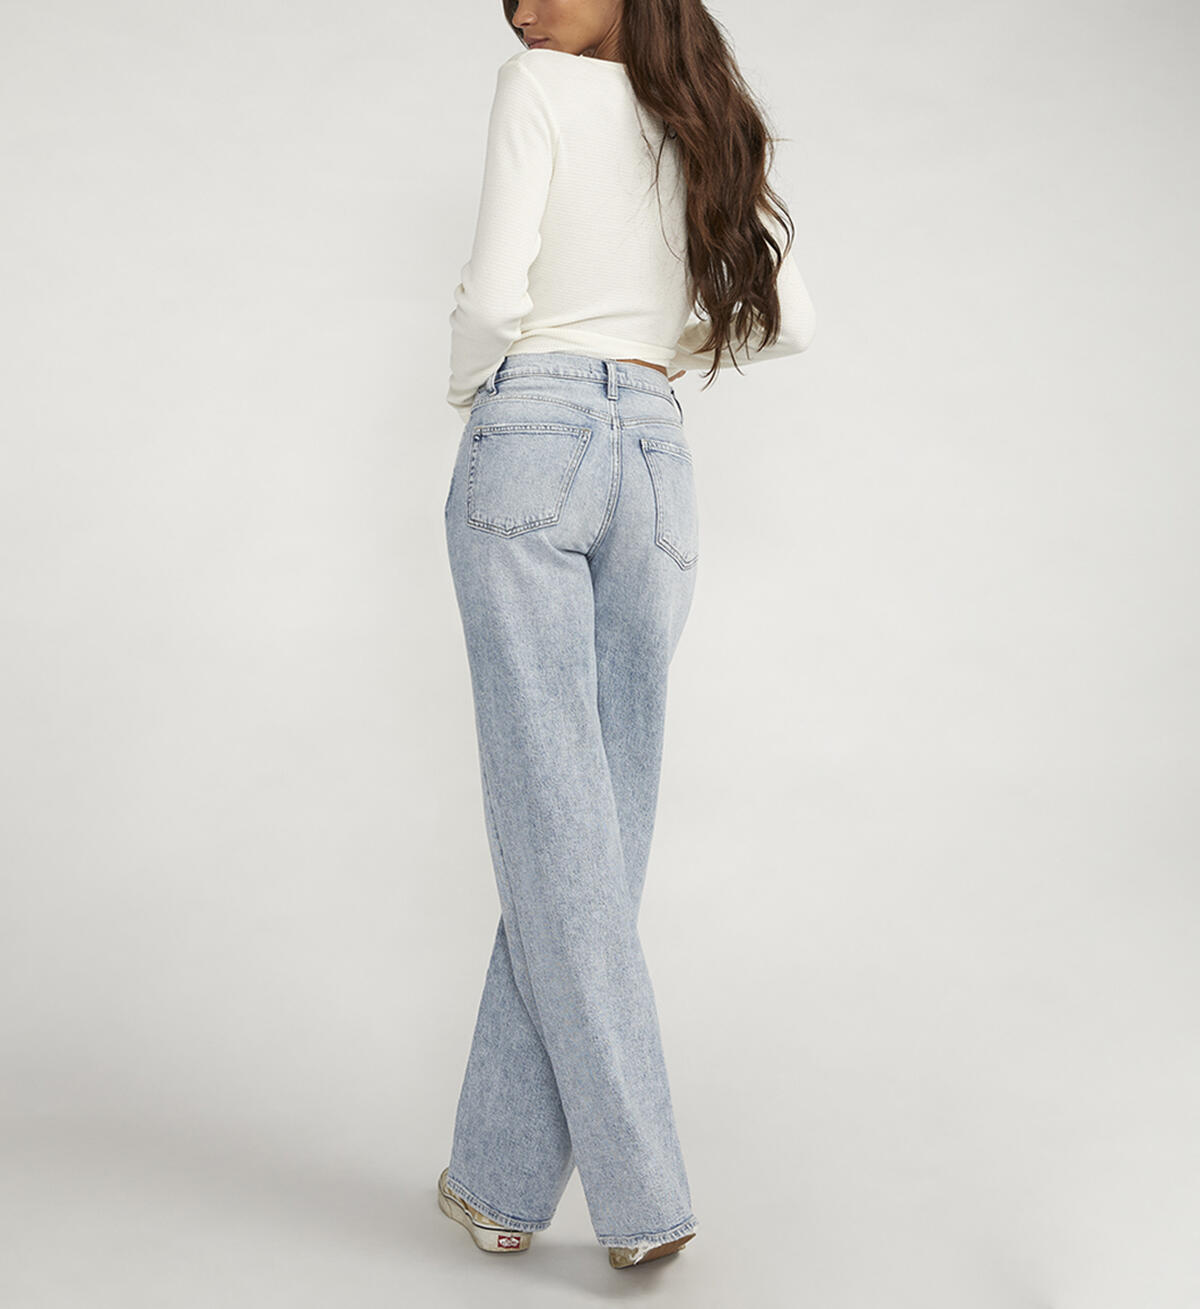 Highly Desirable High Rise Trouser Leg Jeans, Indigo, hi-res image number 4